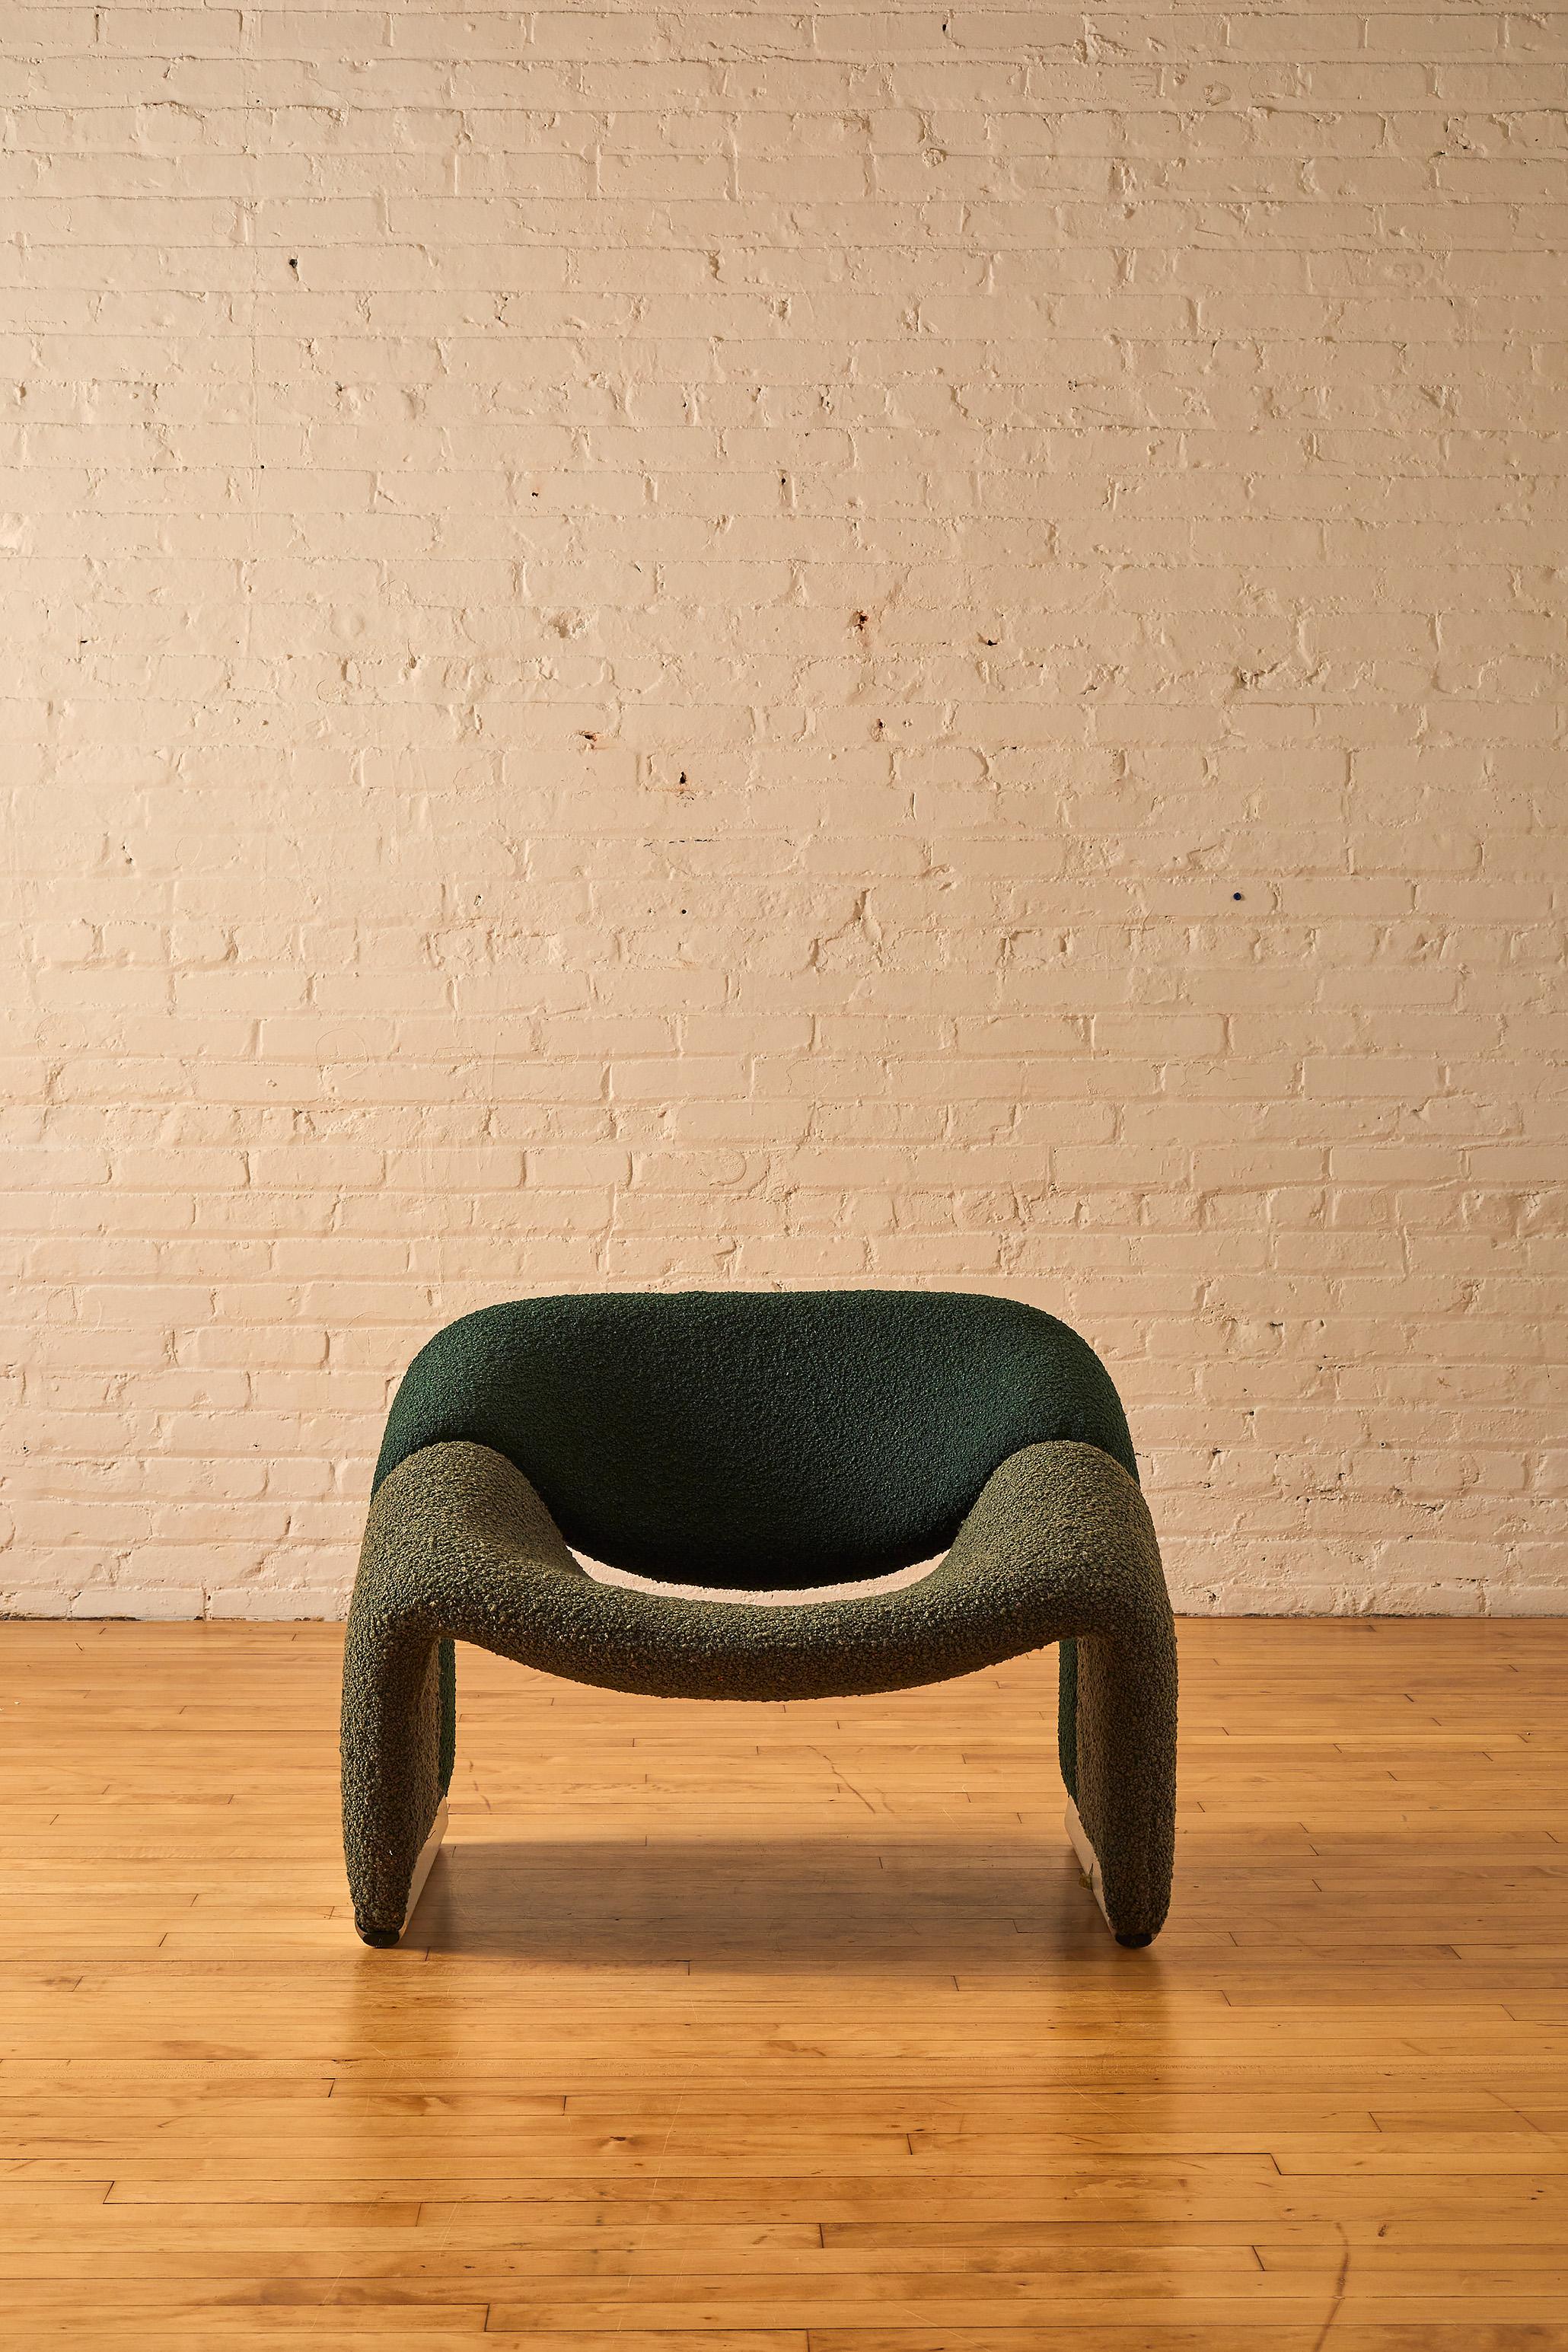 Pierre Paulin “Groovy” lounge chair. Newly re-upholstered in two-tone green boucle.

